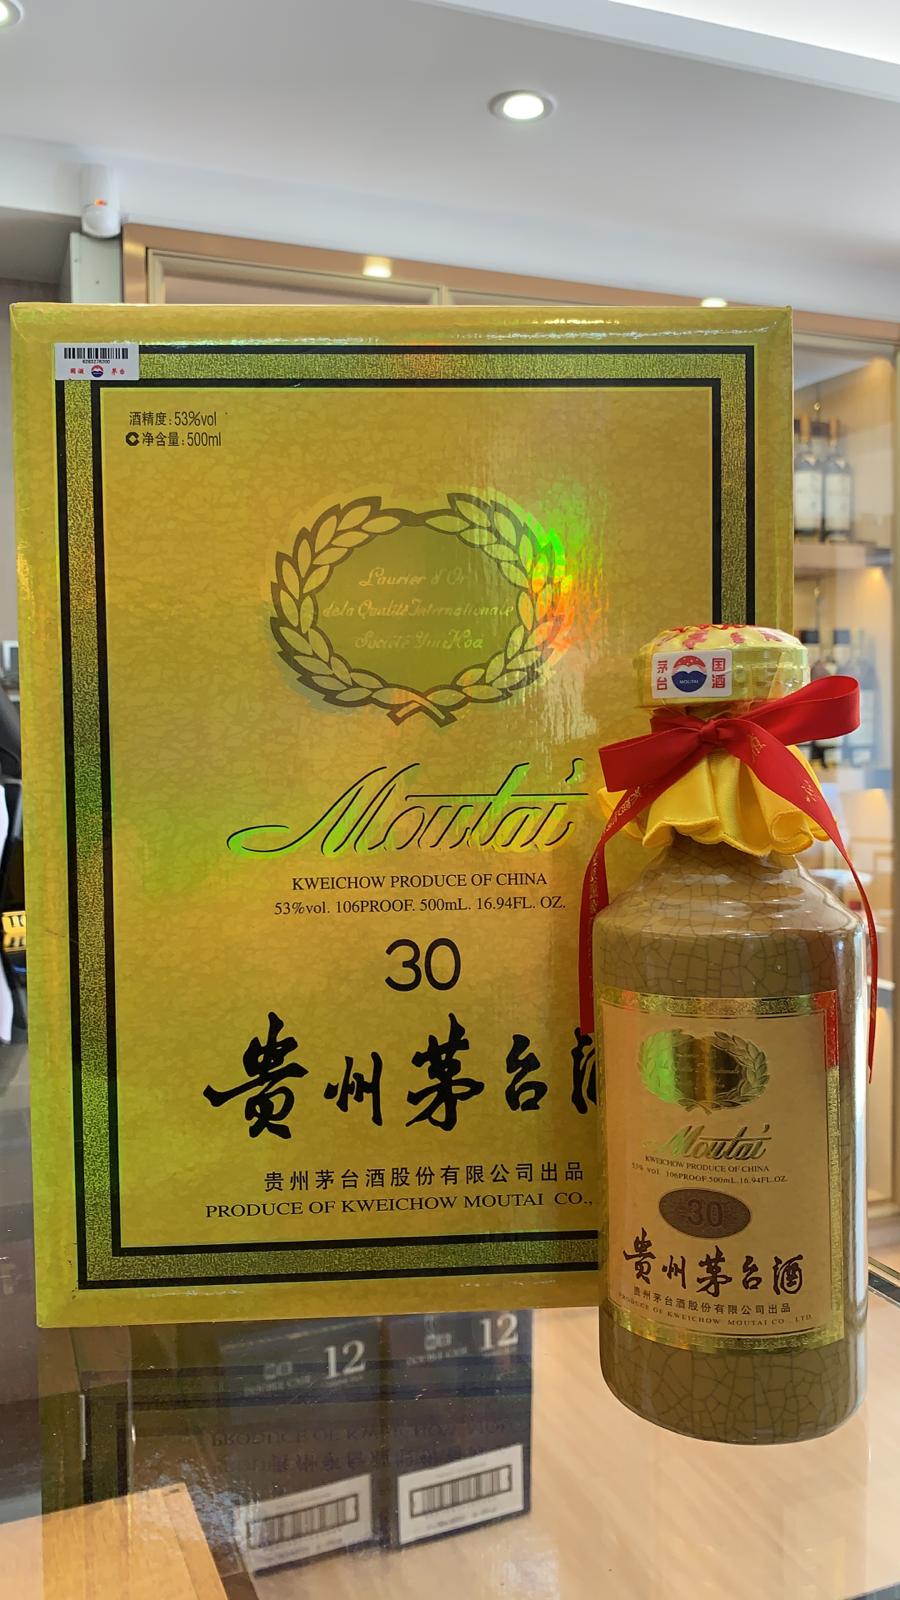 Kweichow Moutai 30 Year Old 500ml